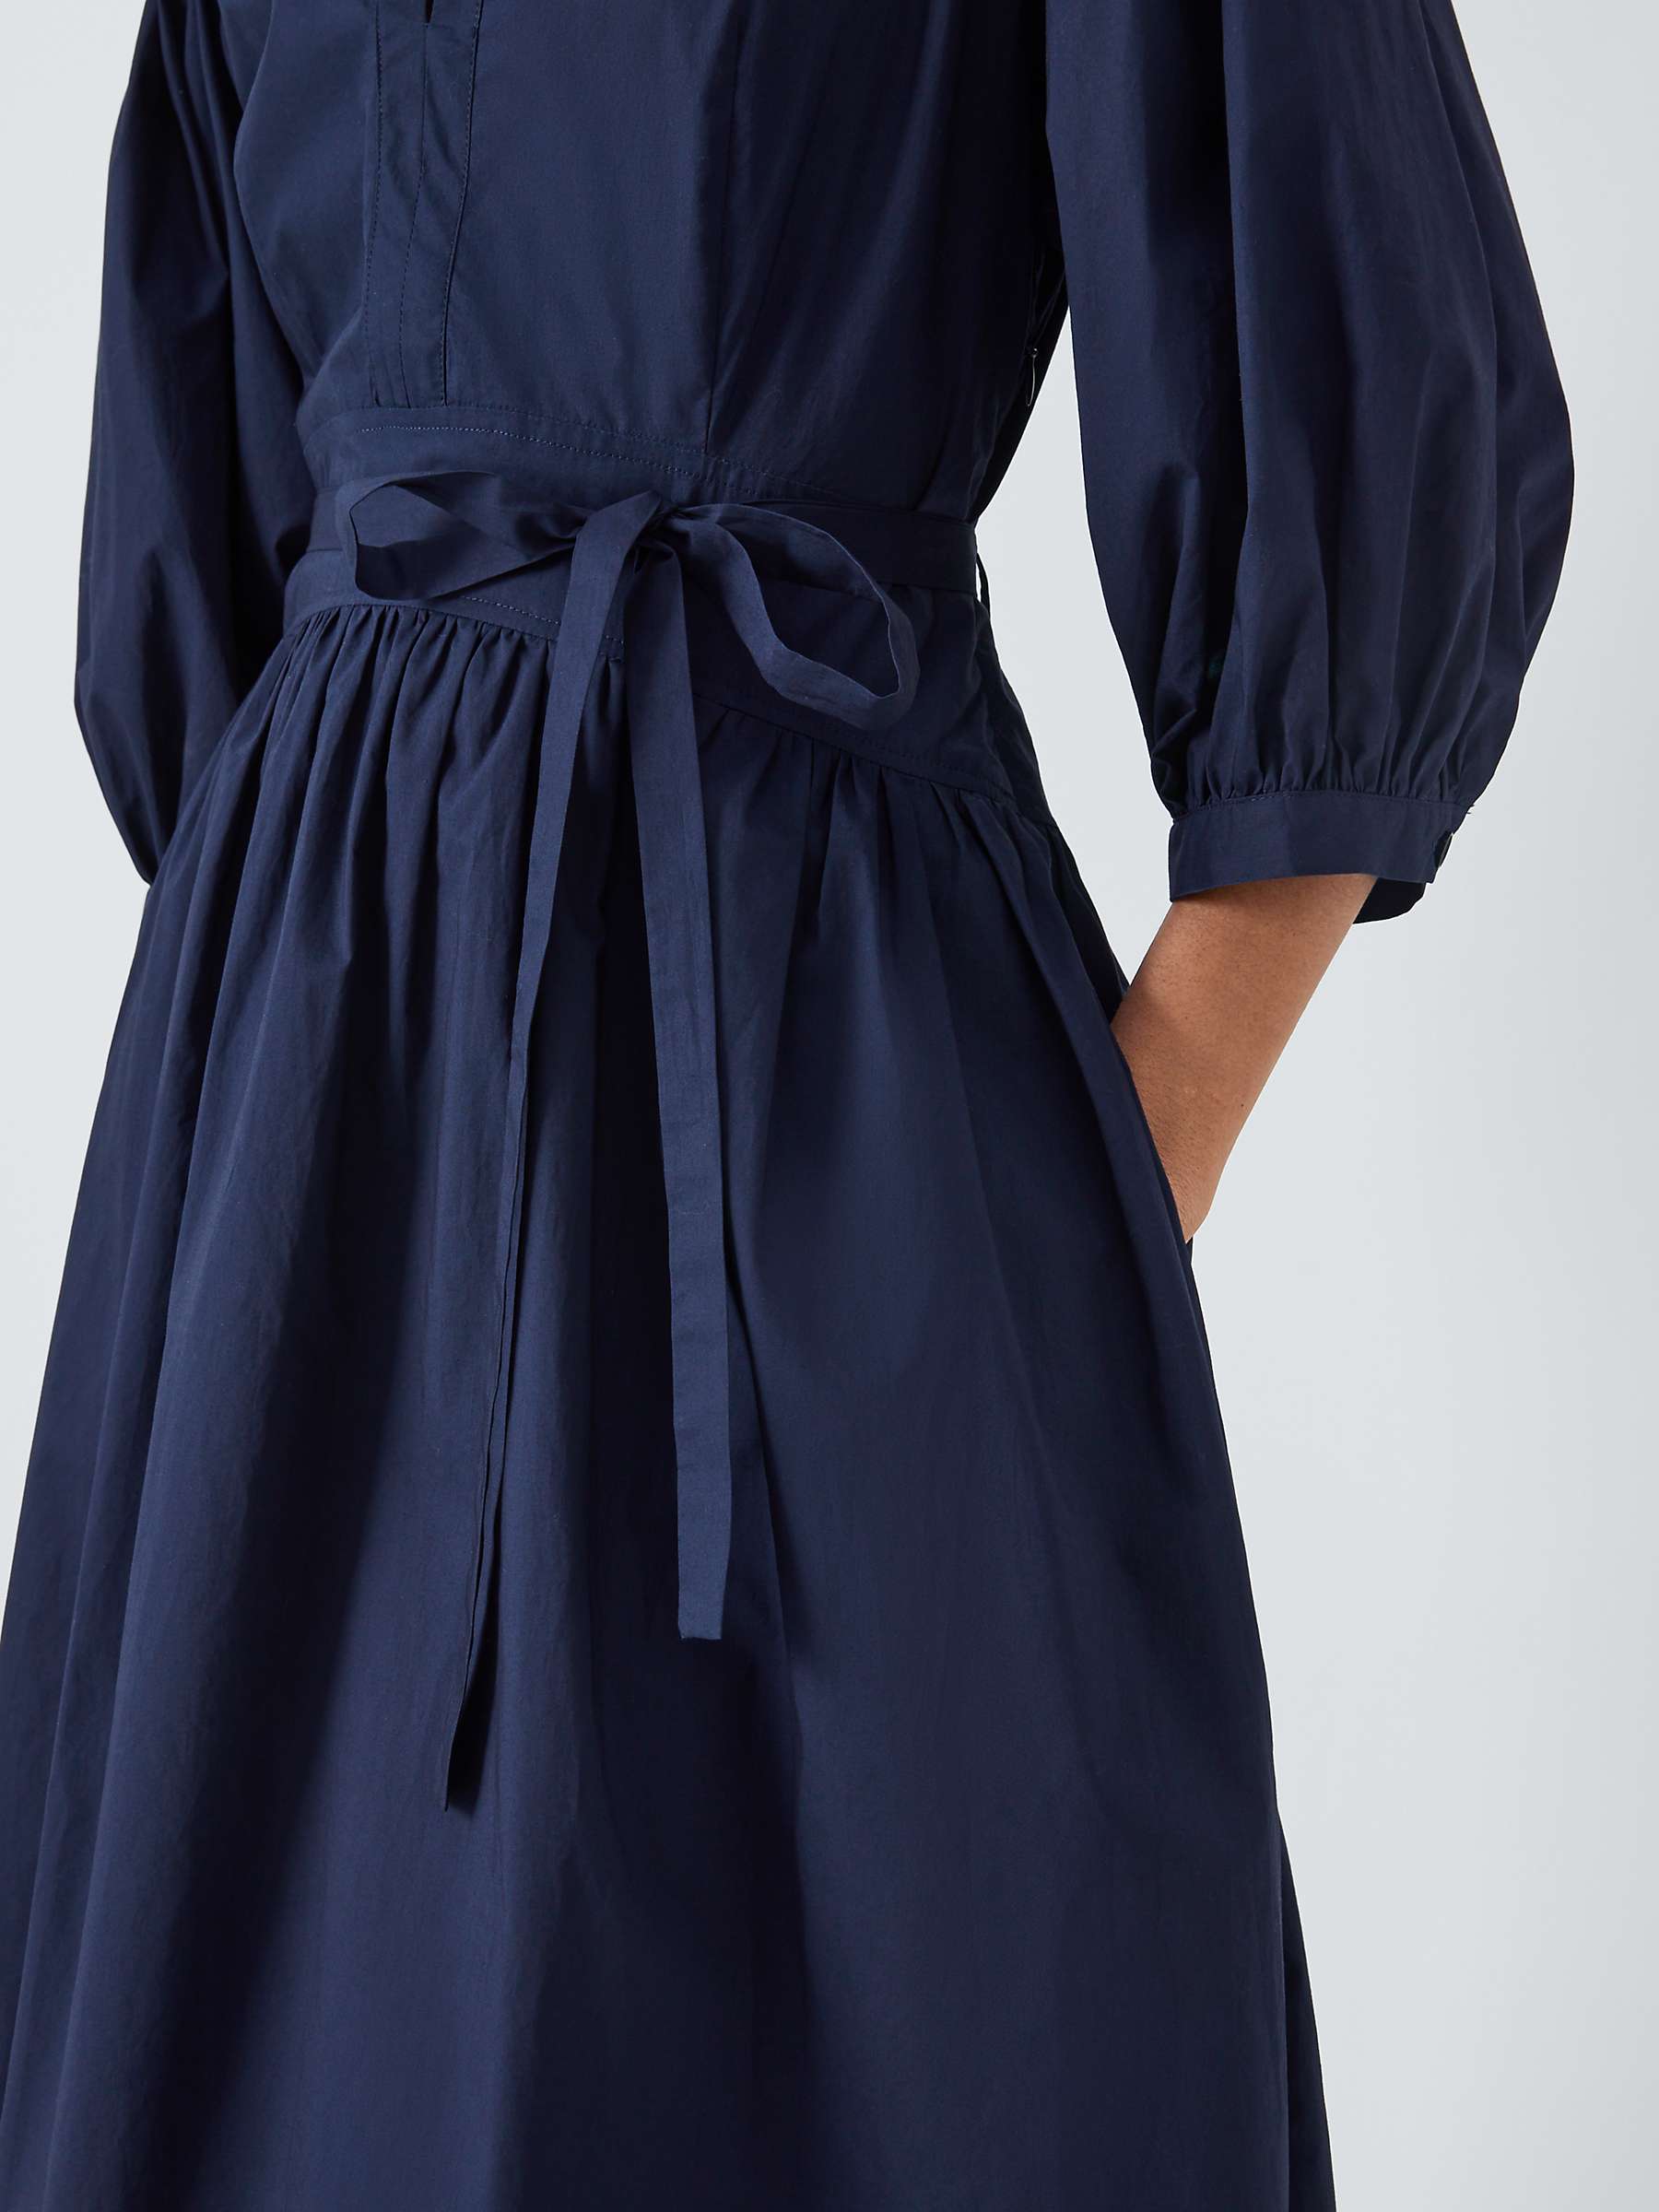 Buy Vivere By Savannah Miller Florence Puff Sleeve Cotton Midi Dress, Navy Online at johnlewis.com